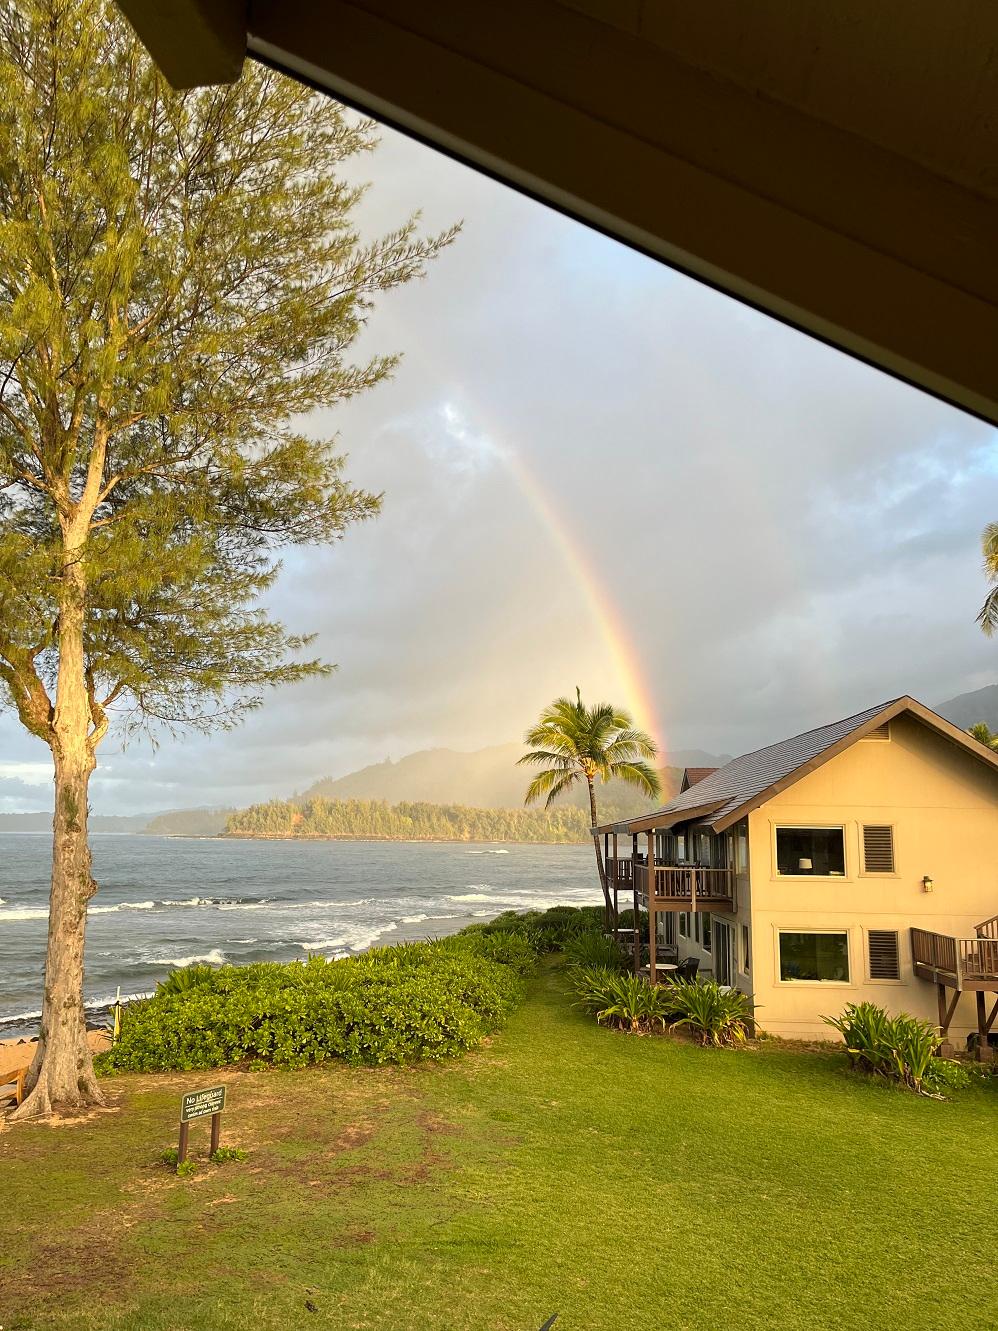 A rainbow over Hanalei Bay is seen from Hanalei Colony Resort. (Courtesy of Dreamstime)